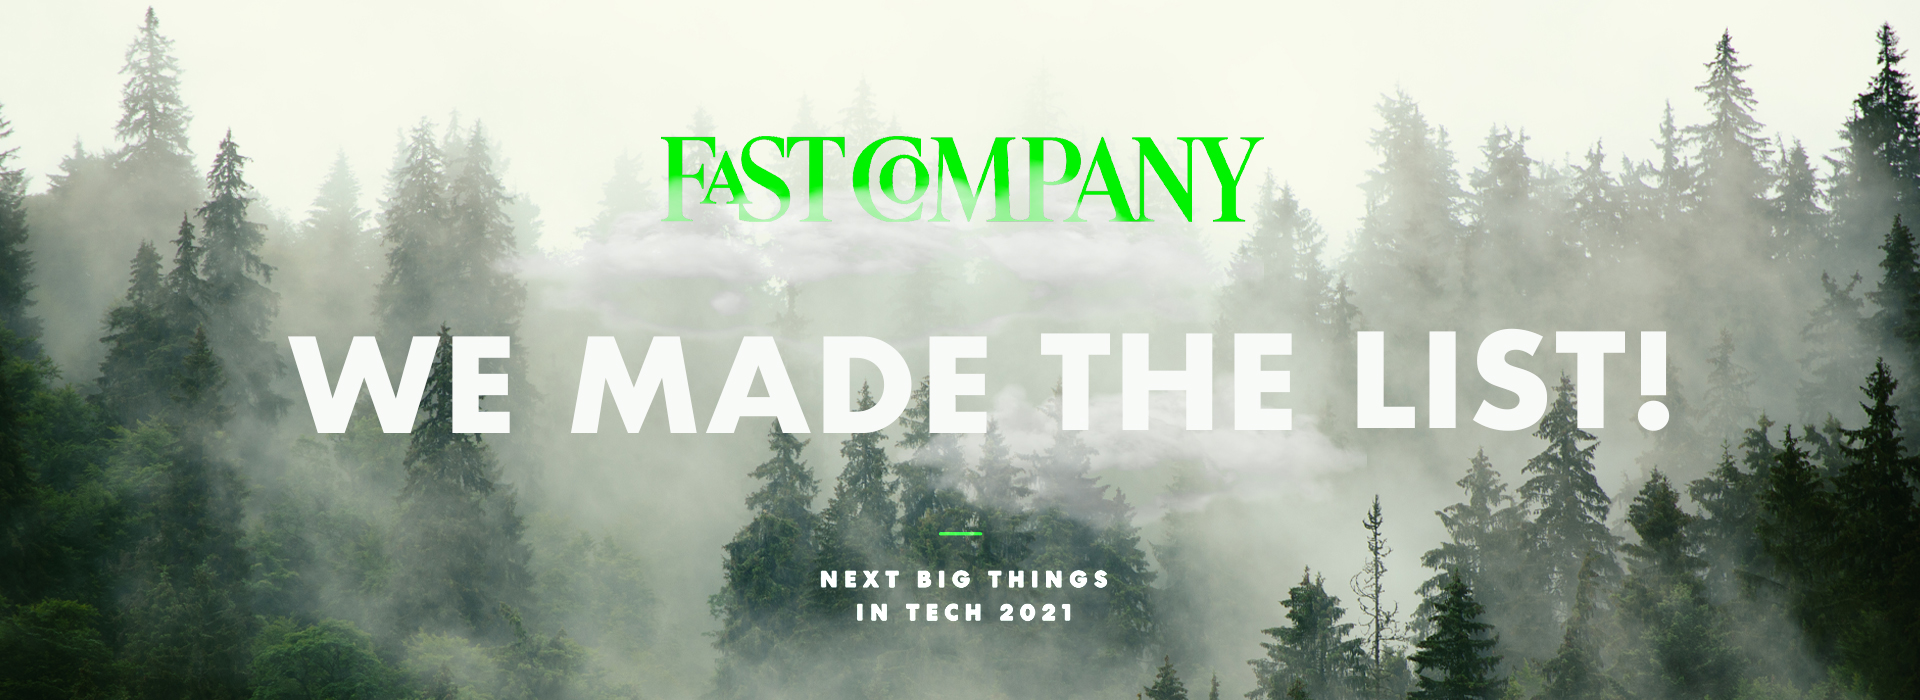 Fast Company Next Big Things in Tech 2021 ad